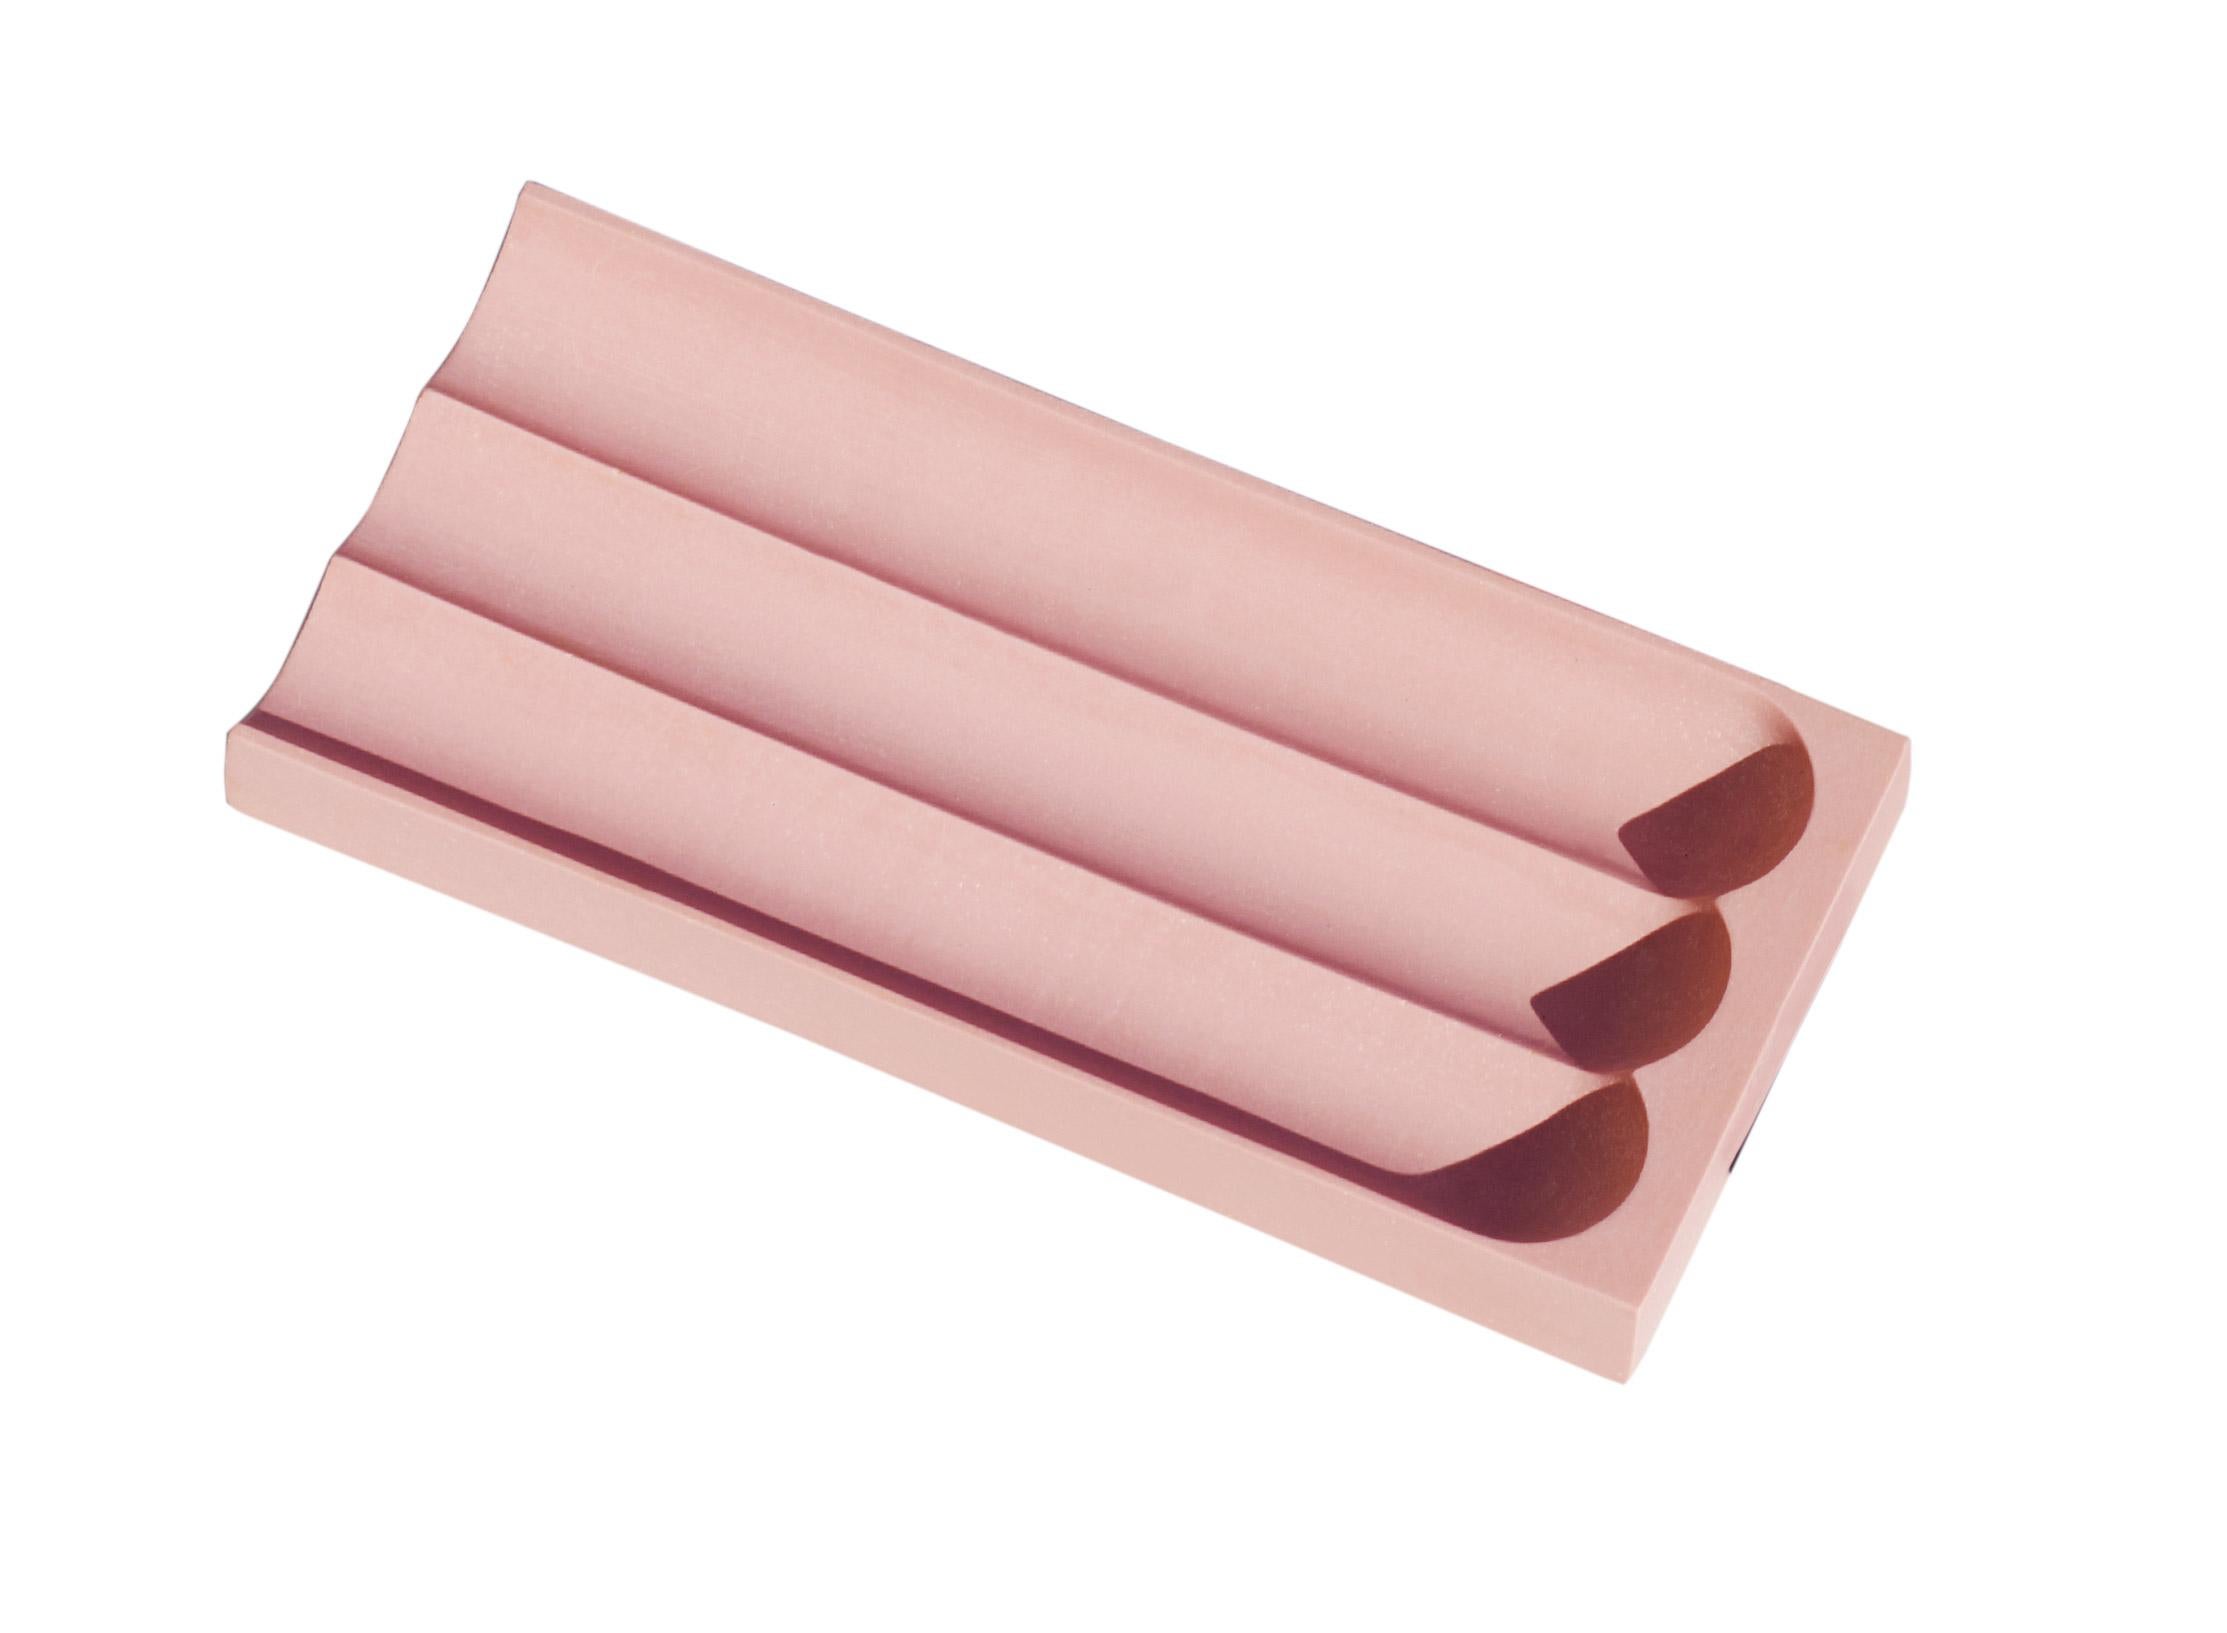 Post-Modern Flute Pencil Tray in Bubble Gum Pink